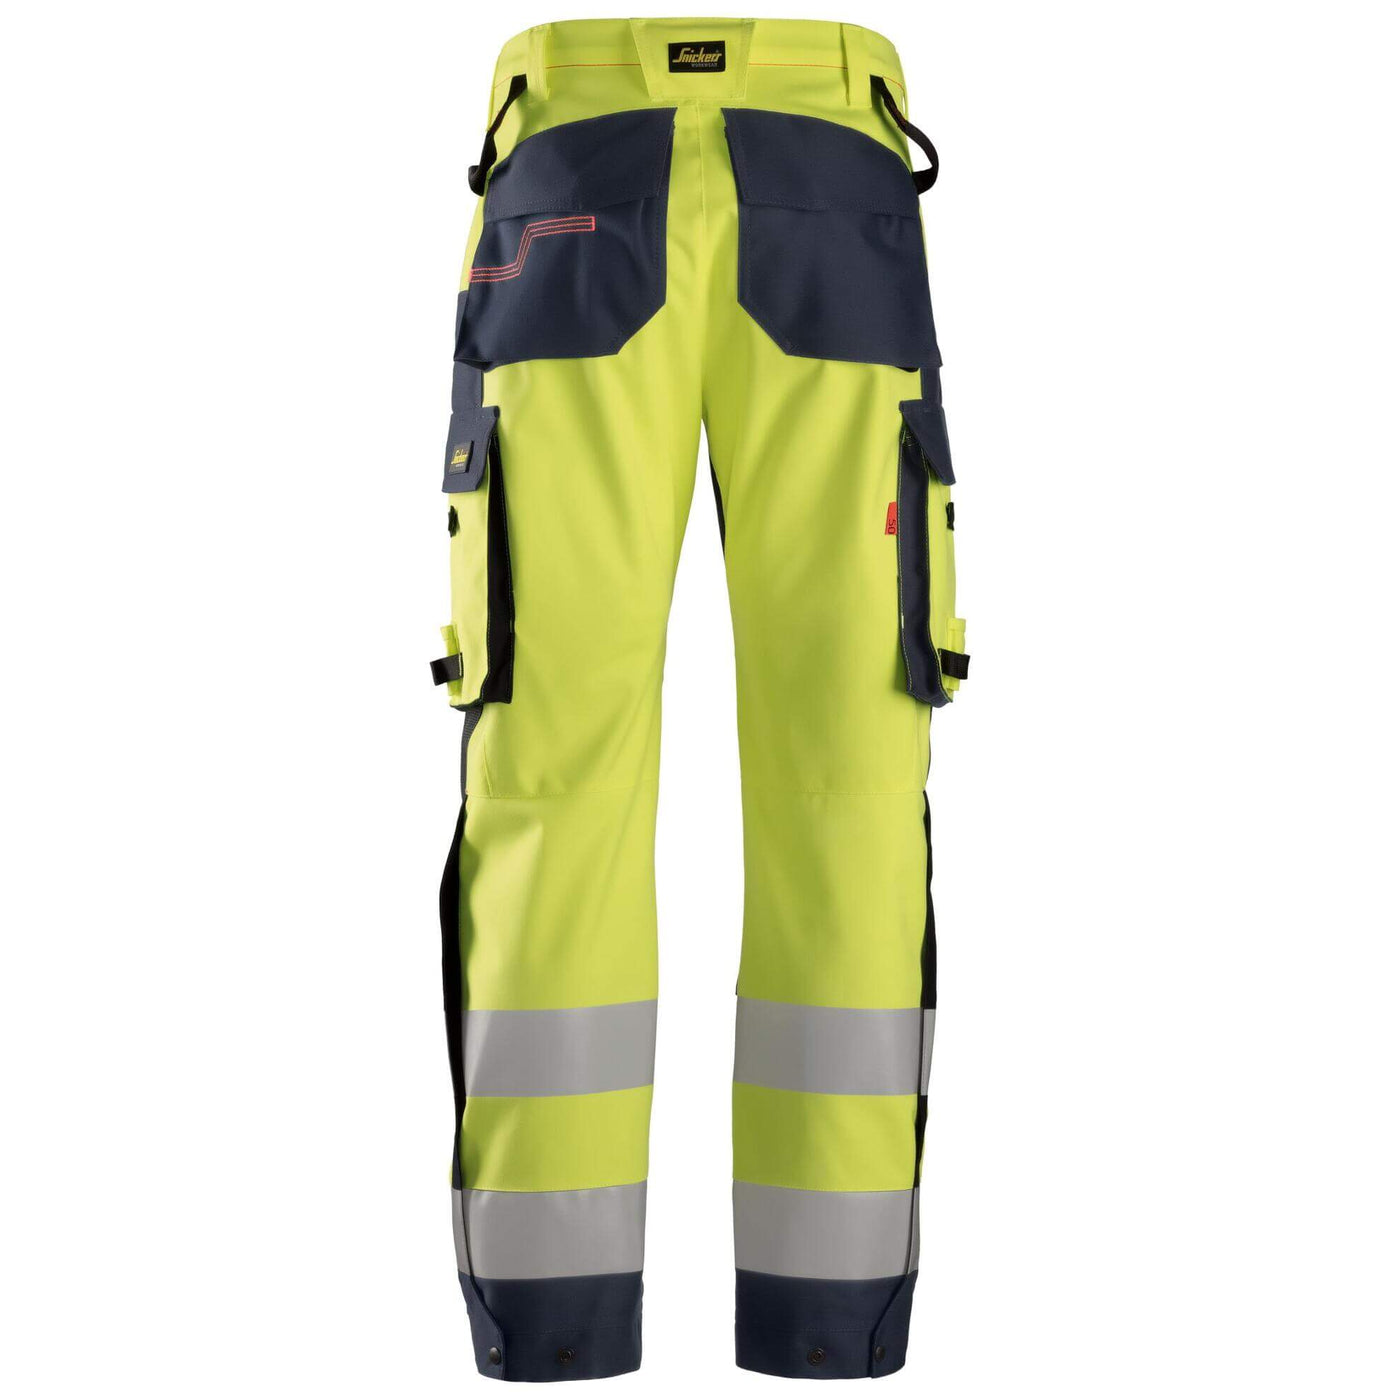 Snickers 6563 ProtecWork Hi Vis Waterproof Shell Over Trousers Class 2 Hi Vis Yellow Navy Blue back #colour_hi-vis-yellow-navy-blue